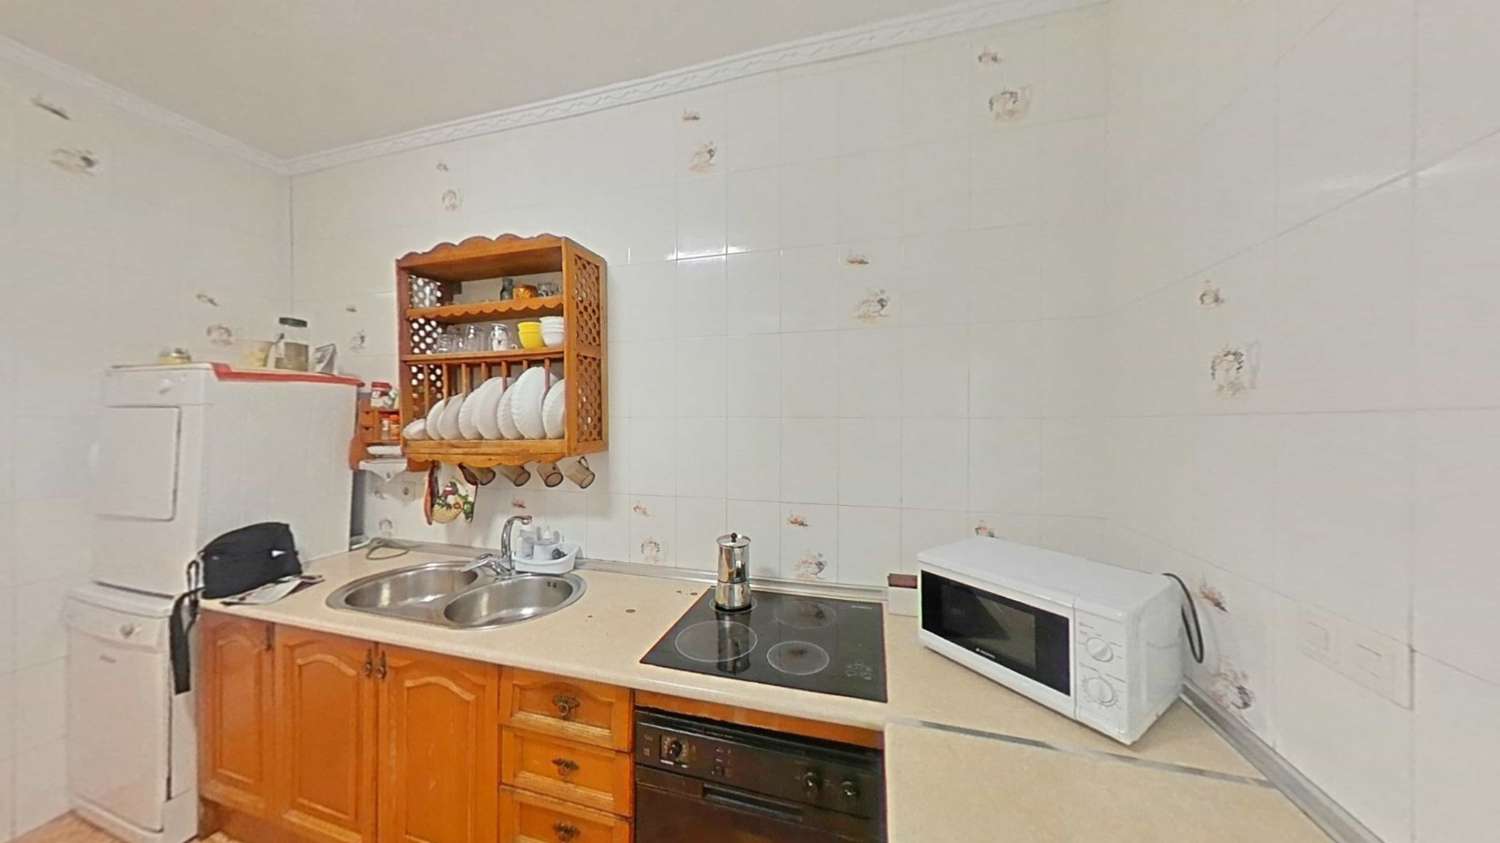 Semi-detached house with 3 bedrooms in Platero area